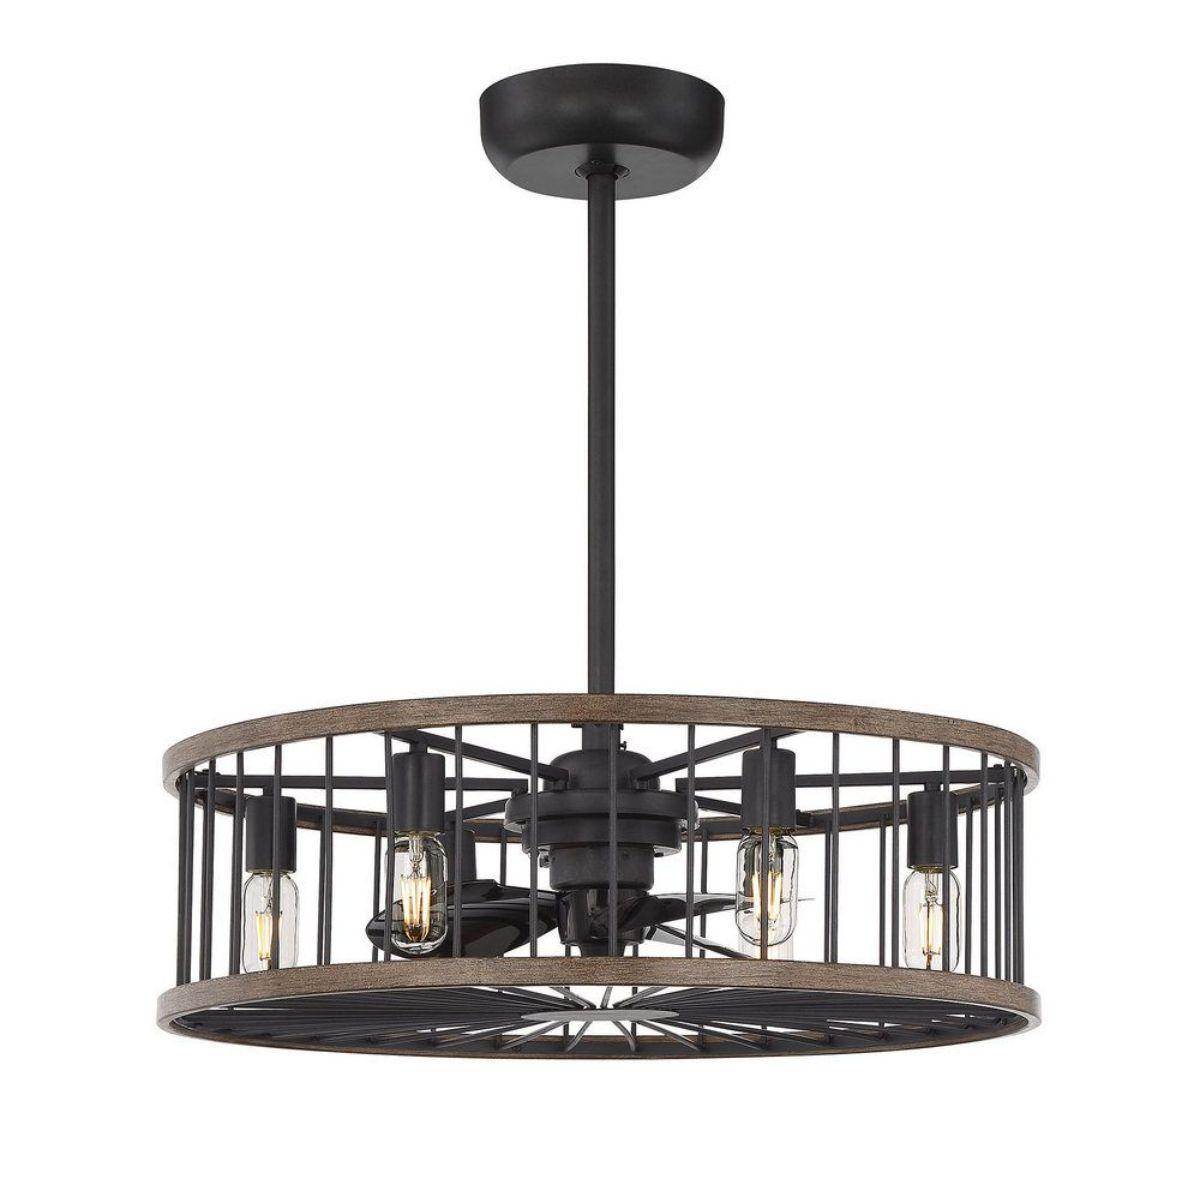 Kona 26 Inch Chandelier Outdoor Ceiling Fan With Light And Remote, Sapele Finish